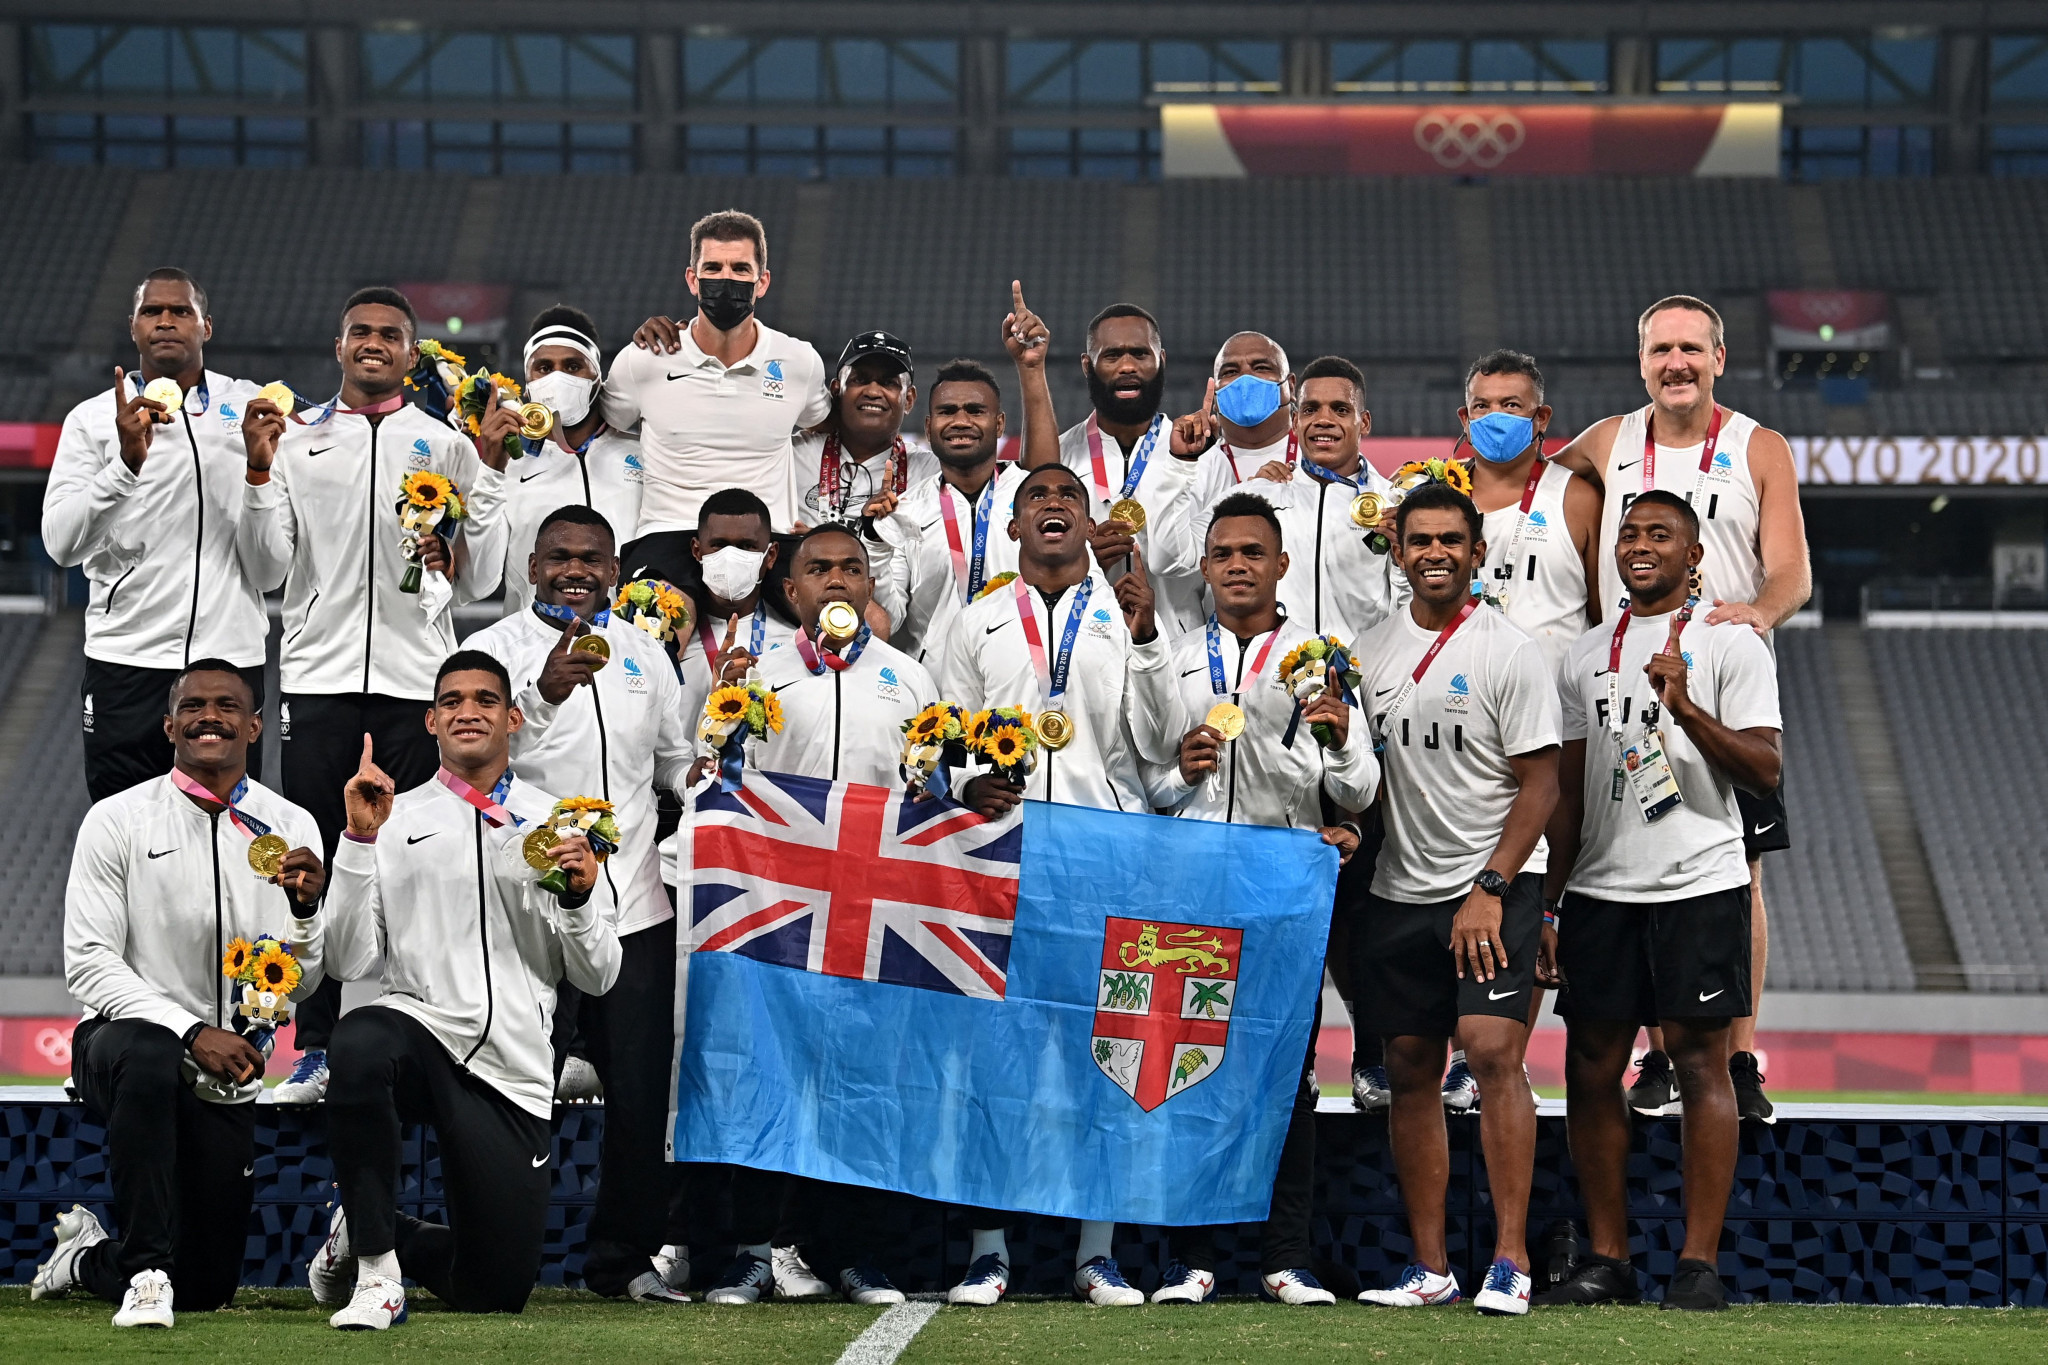 Australia-Pacific project praised for supporting Pasifika athletes to attend Tokyo 2020